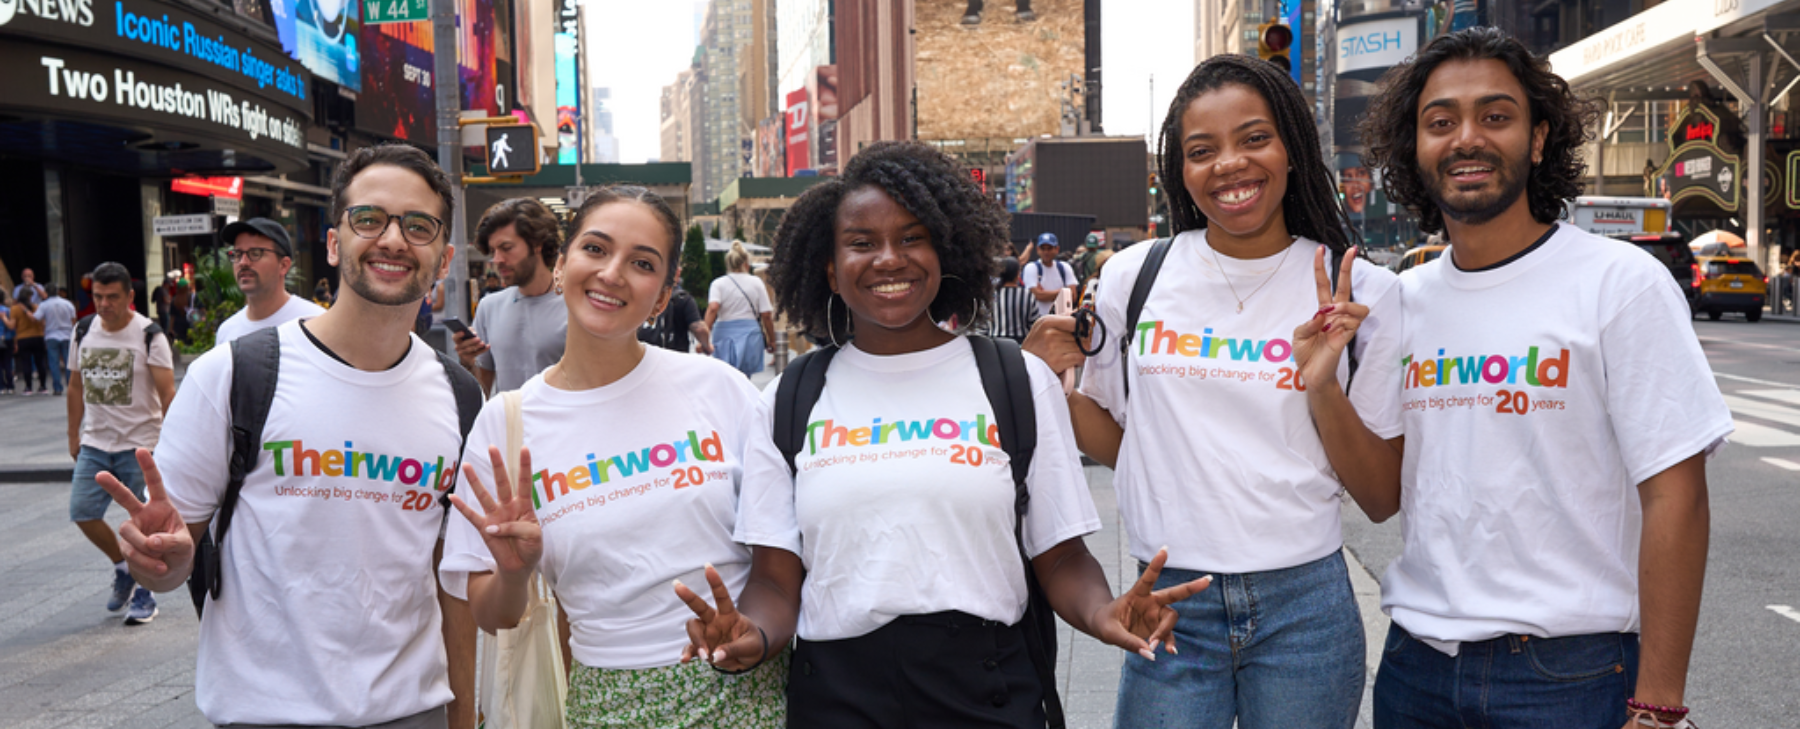 GYAs Blessing Adogame, 23, USA; Gabriel Monteiro, 25, Brazil; Yuv Sungkur, 23, Mauritius; Jennifer Borrero, 27, USA and Mathilde Boulogne, 19, France. Theirworld Global Youth Ambassadors in central Manhattan where digital billboards for the #LetMeLearn campaign are being displayed during the Transforming Education Summit at UNGA 2022.